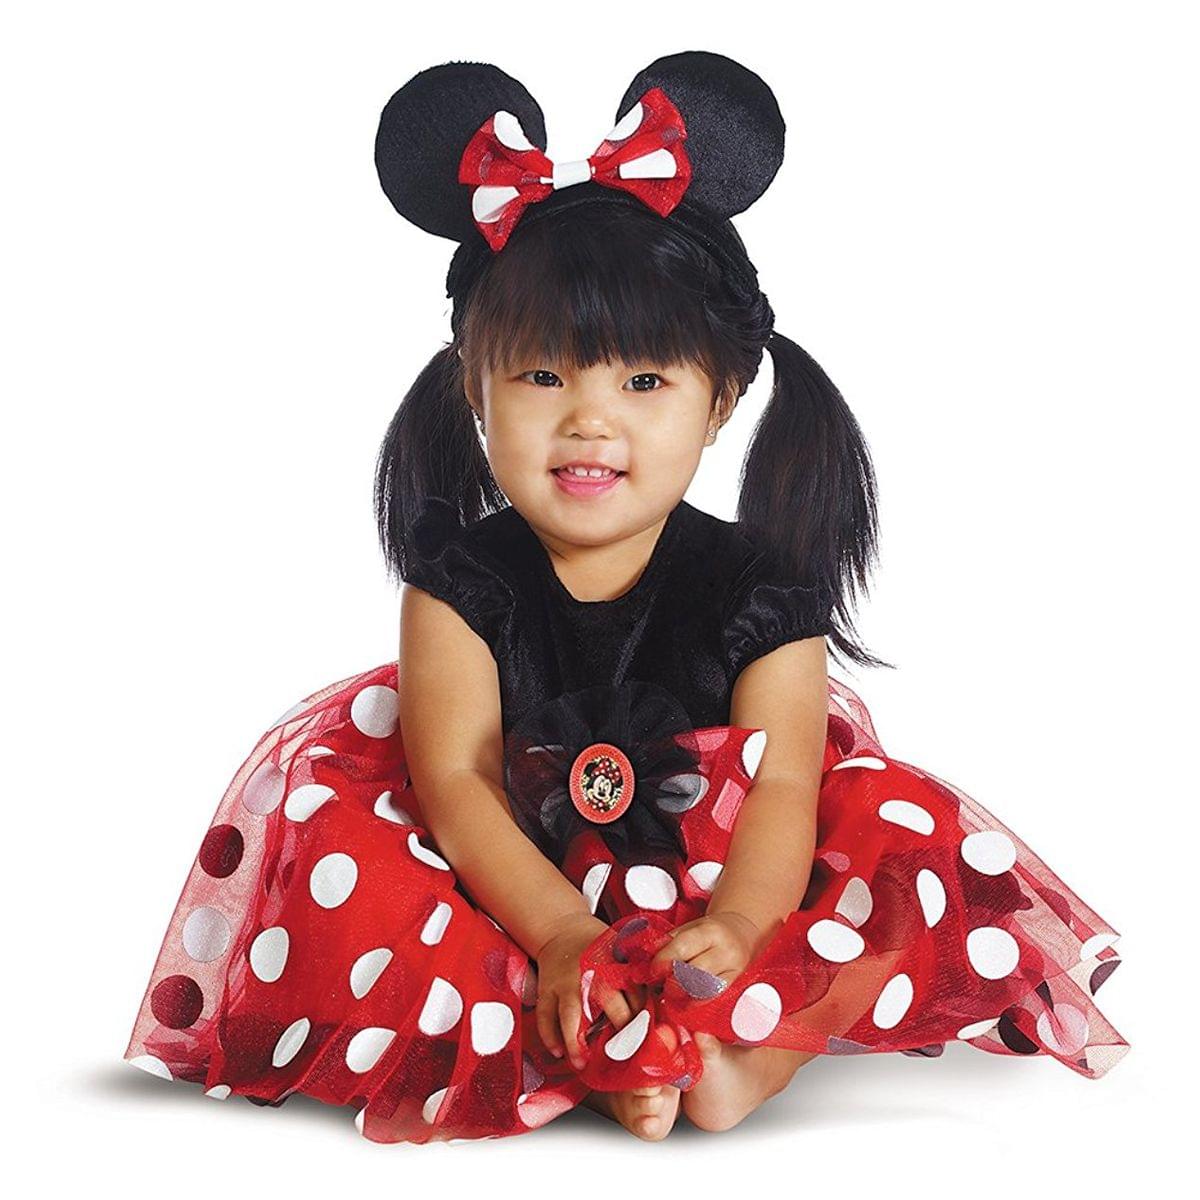 Minnie Red Infant Costume